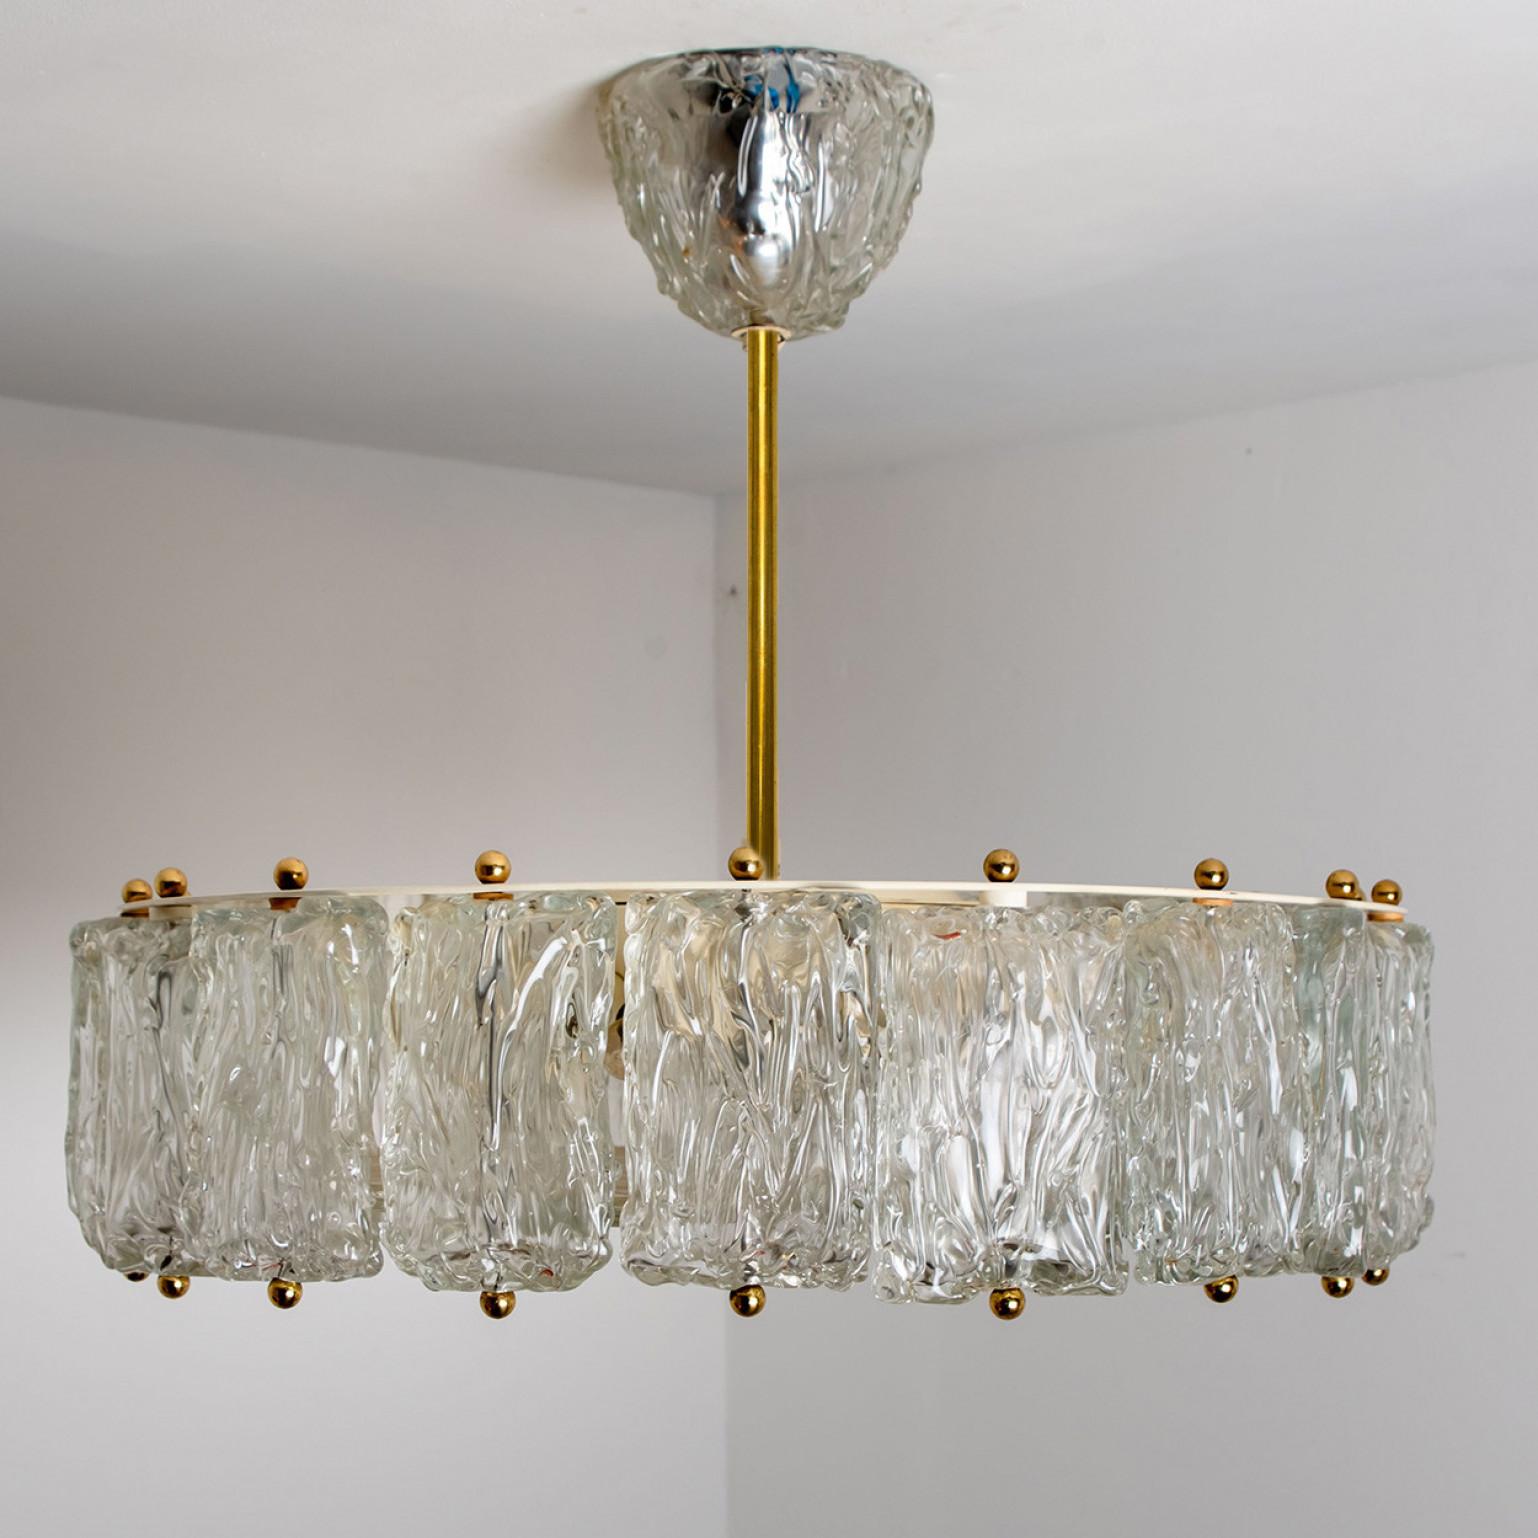 An large elegant hand blown Murano glass pendant by Barovier & Toso, Italy in 1960. With thick clear iced glass with brass details. The textured glass refracts the light beautifully. The pendant fills the room with a soft, warm and welcoming